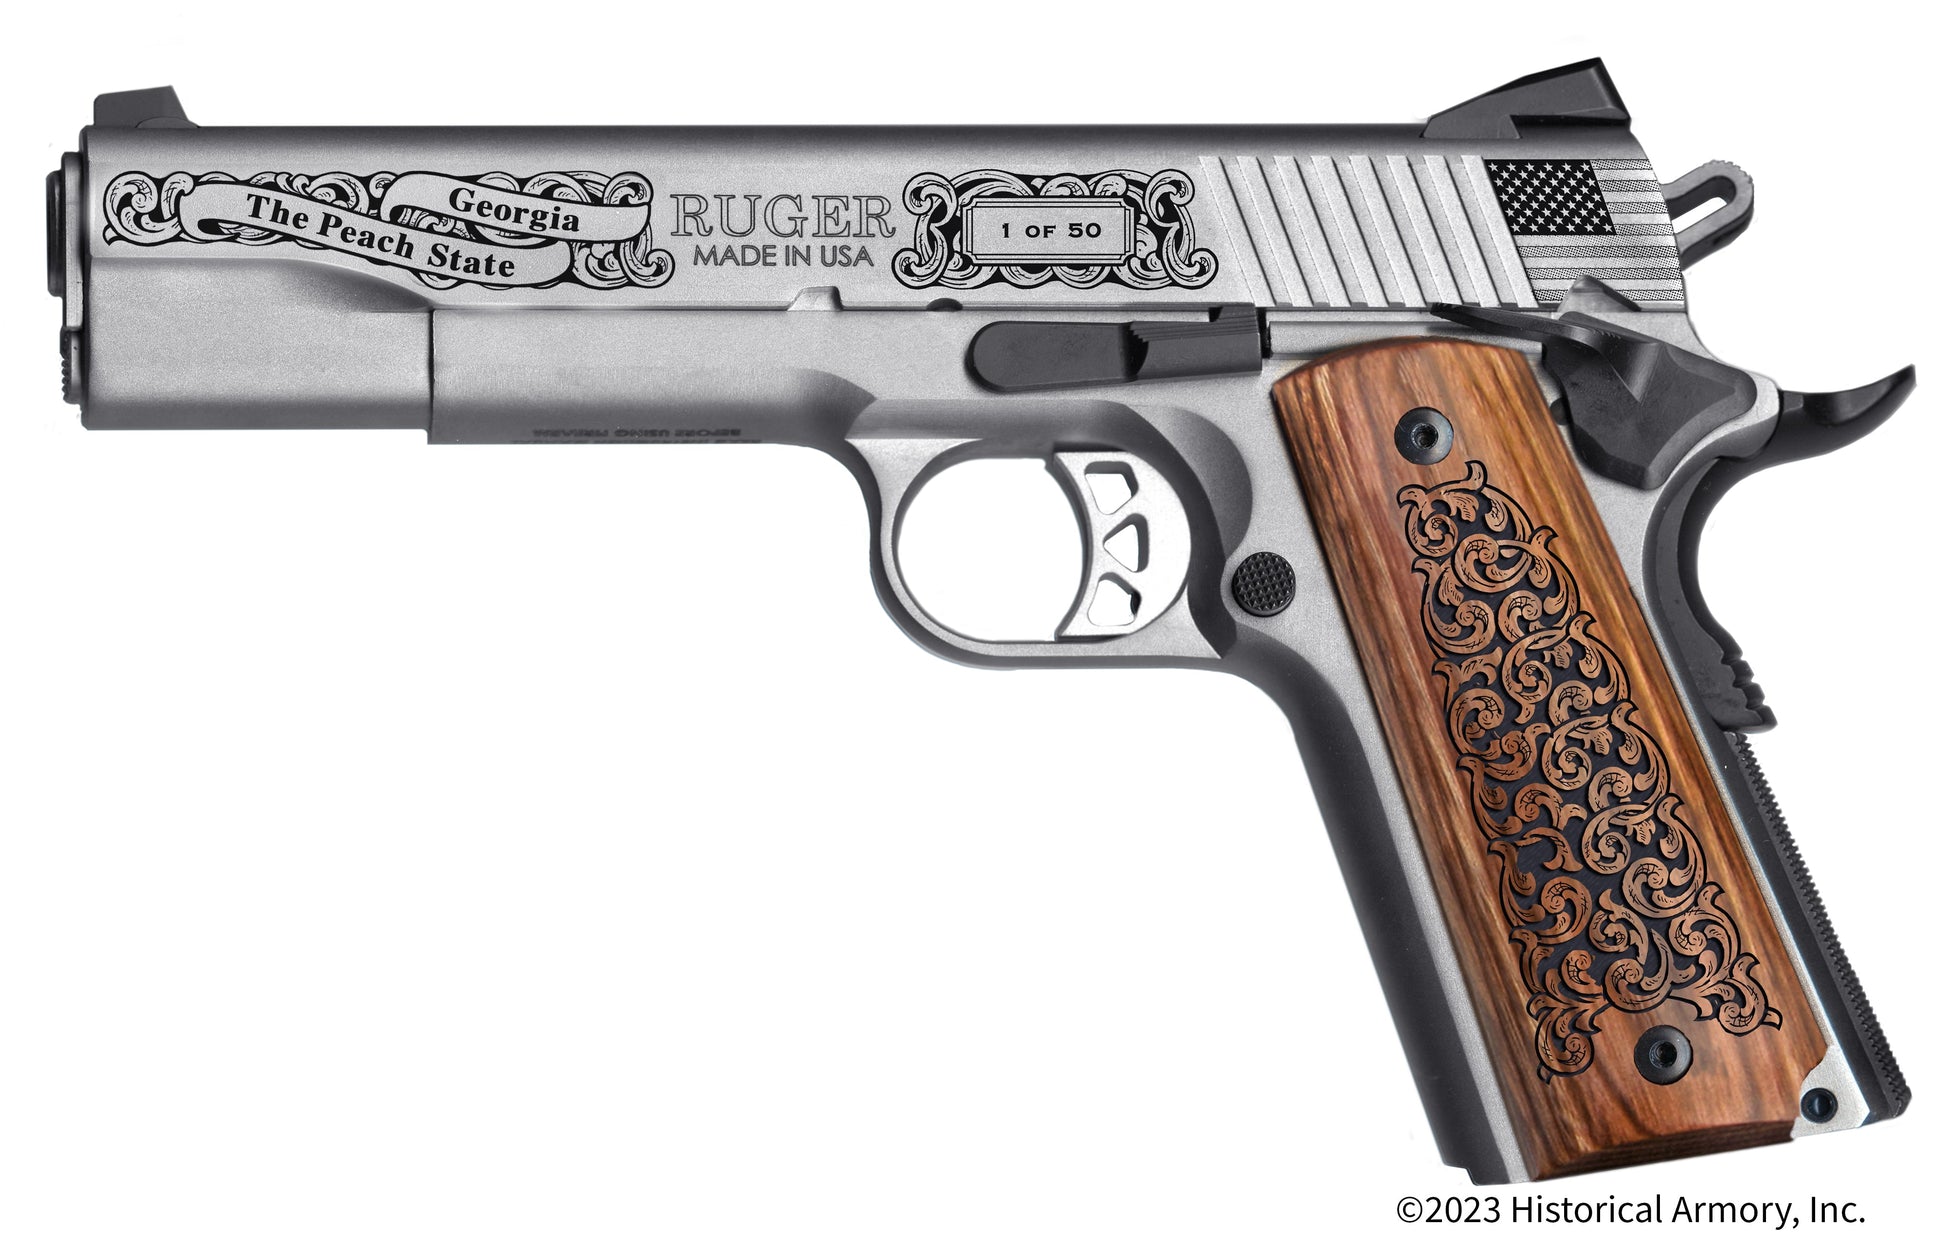 Dougherty County Georgia Engraved .45 Auto Ruger 1911